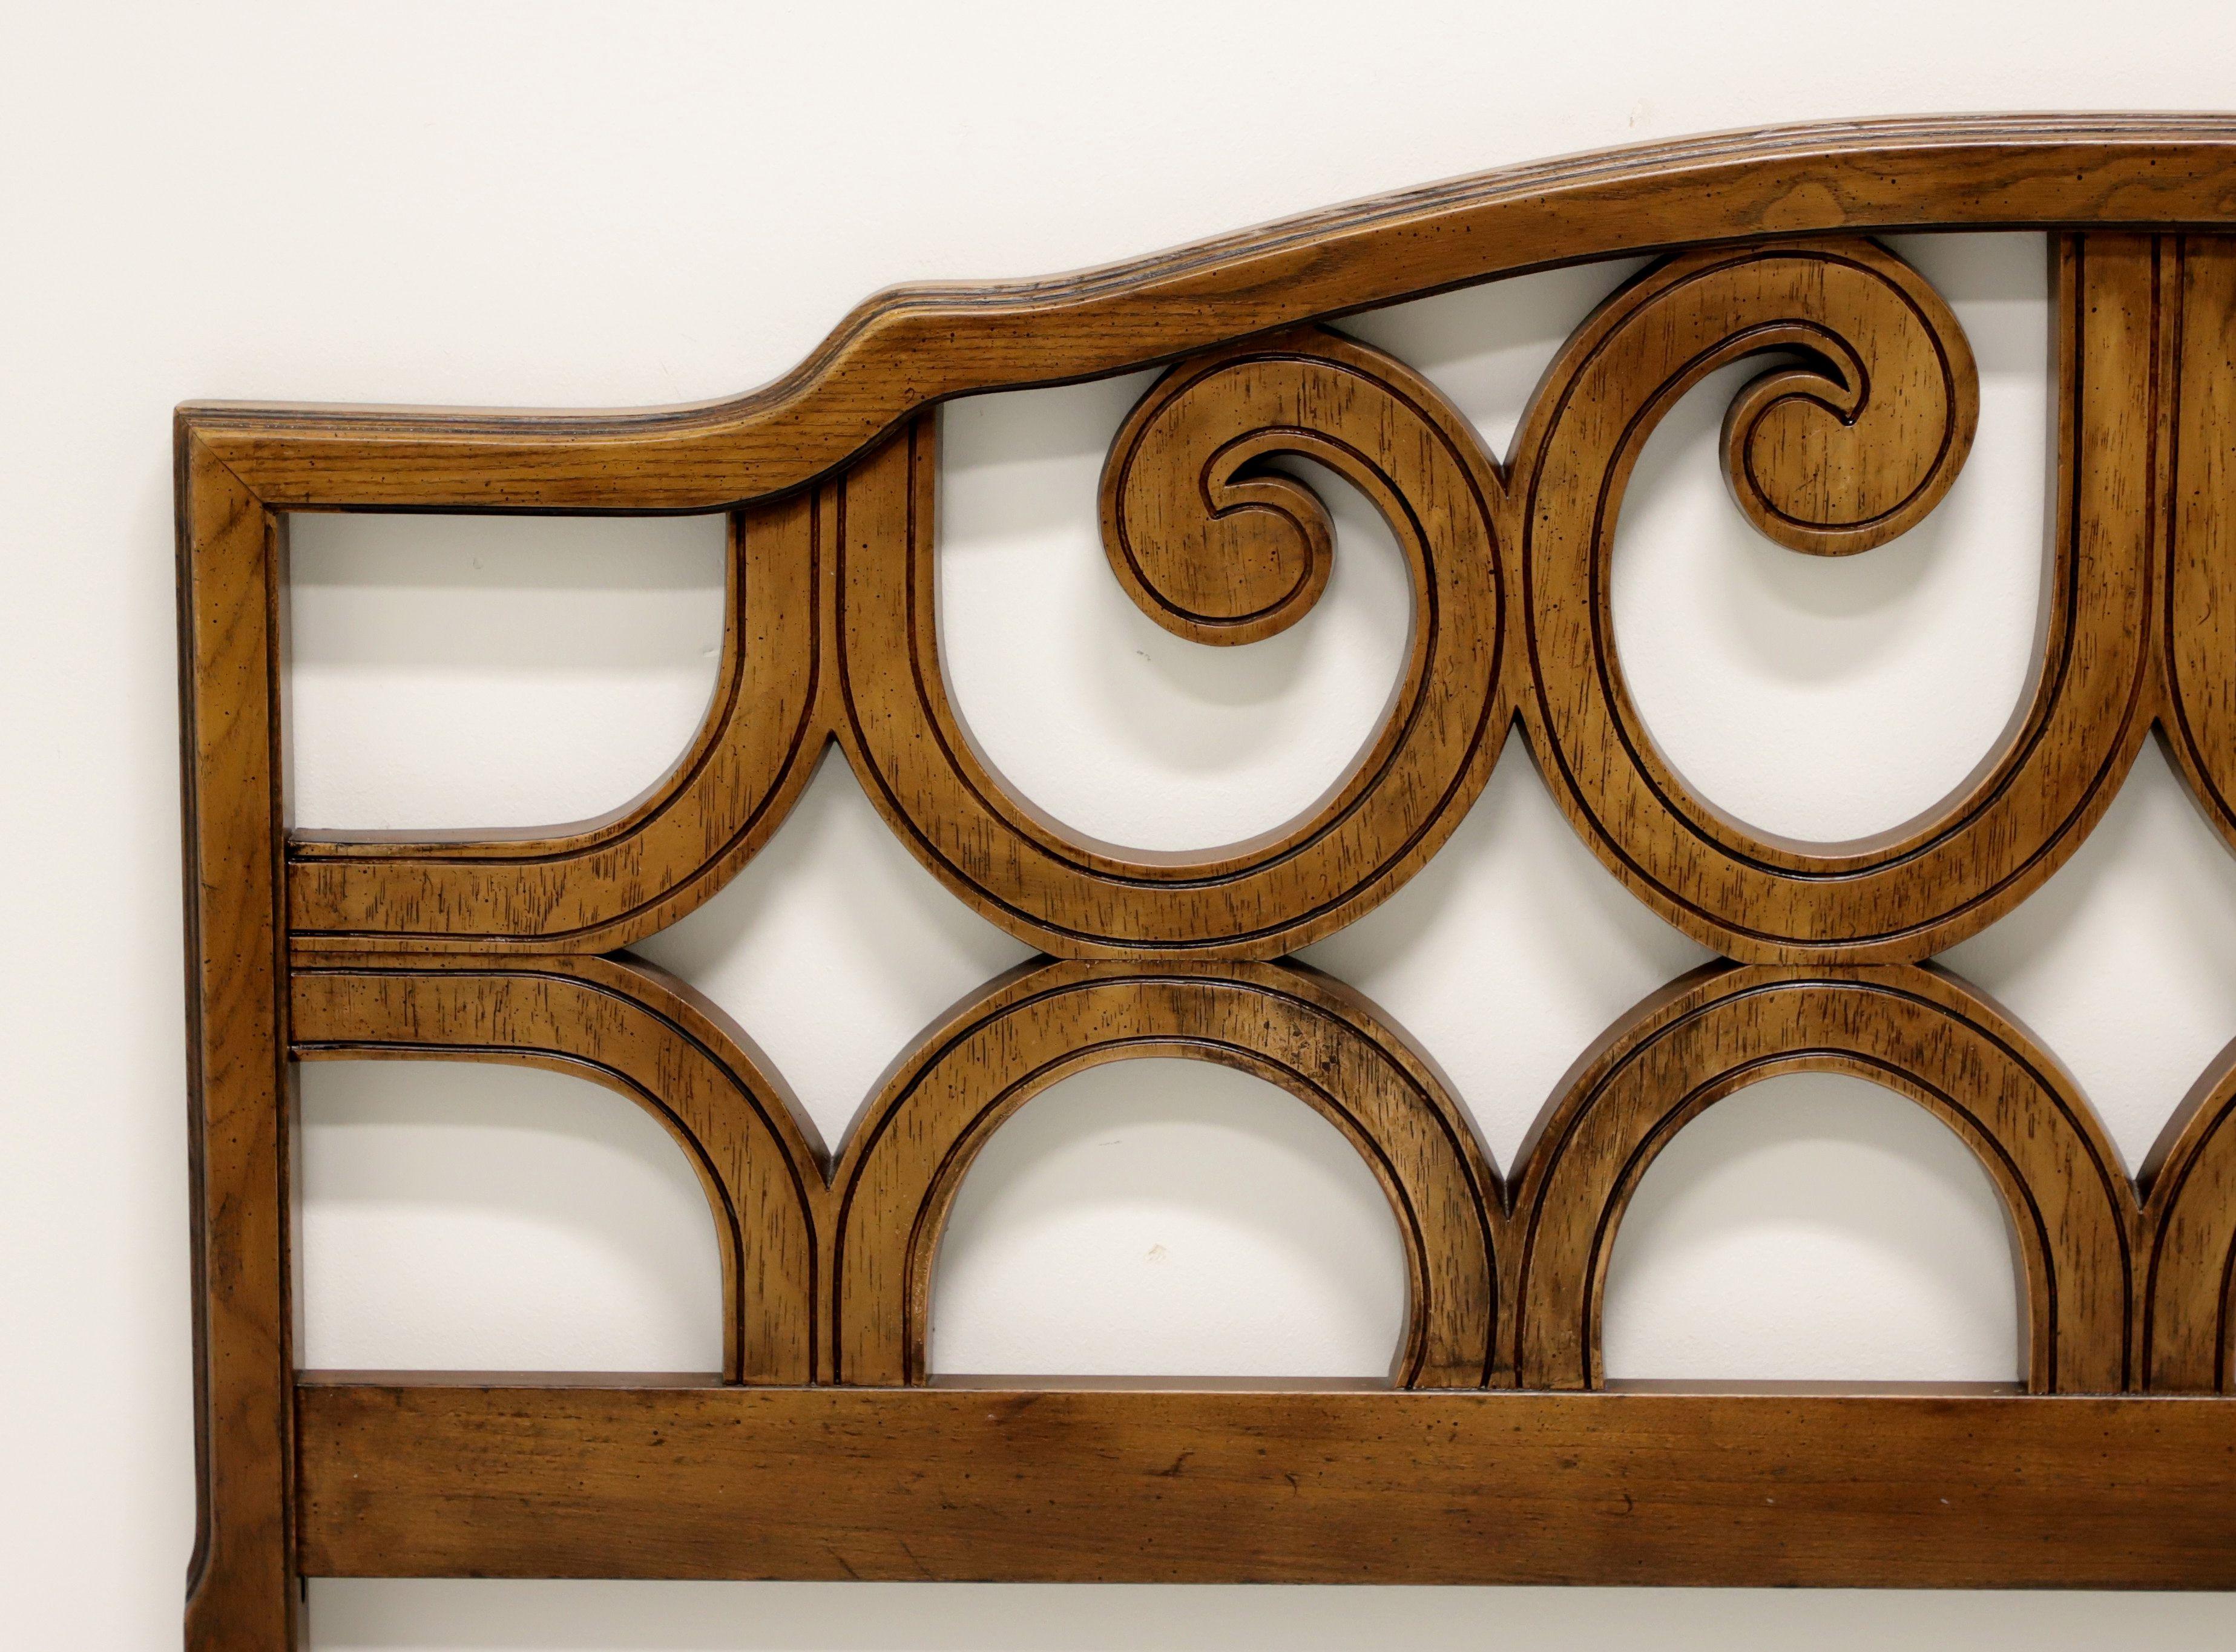 A Spanish style full size headboard, unbranded, similar quality to Drexel. Solid pecan with arched top and decorative open carvings. Made in the USA, in the mid 20th century.

Measures: 59.5 W 1.75 D 40.5 H

Exceptionally good condition with